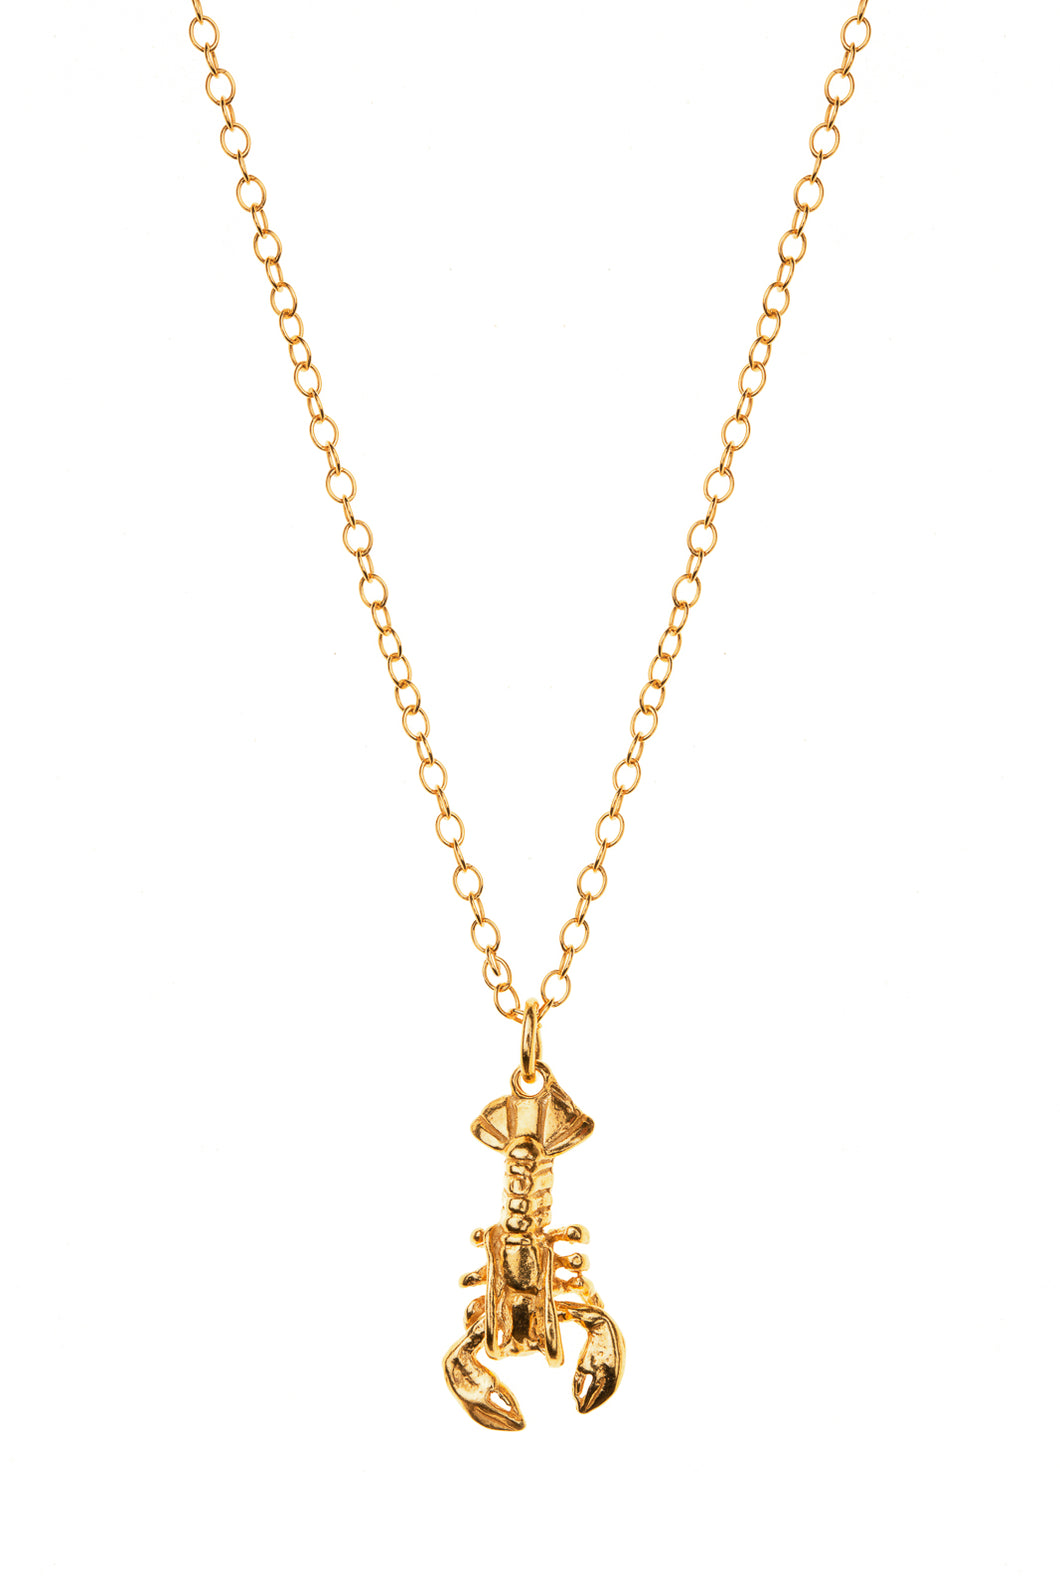 Gold Lobster Charm Necklace